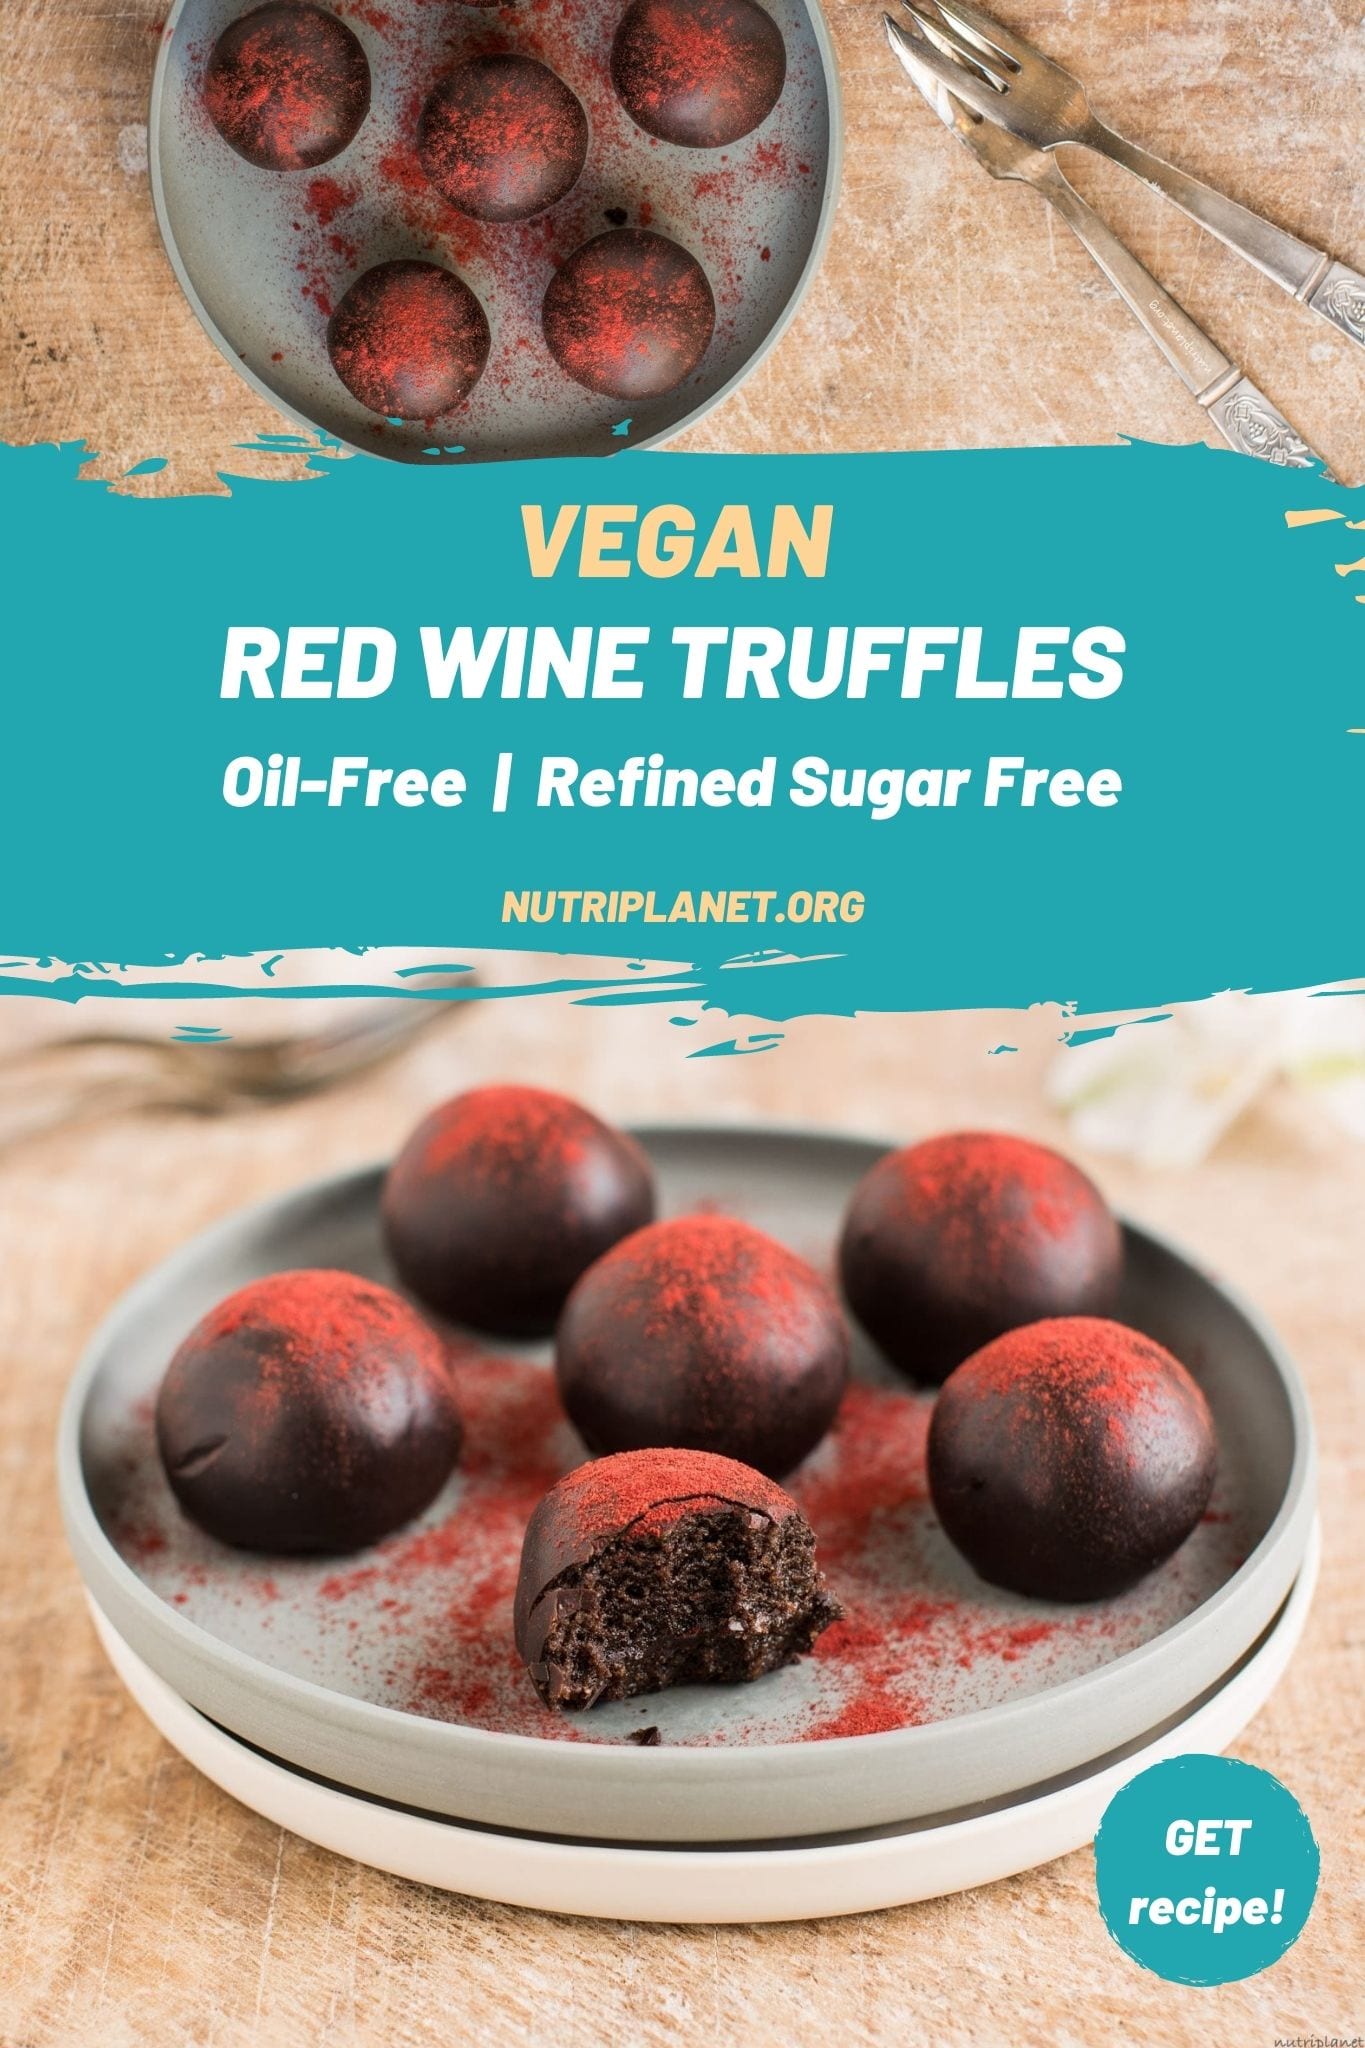 Those vegan truffles with red wine make a decadent chocolate treat for any special occasion.